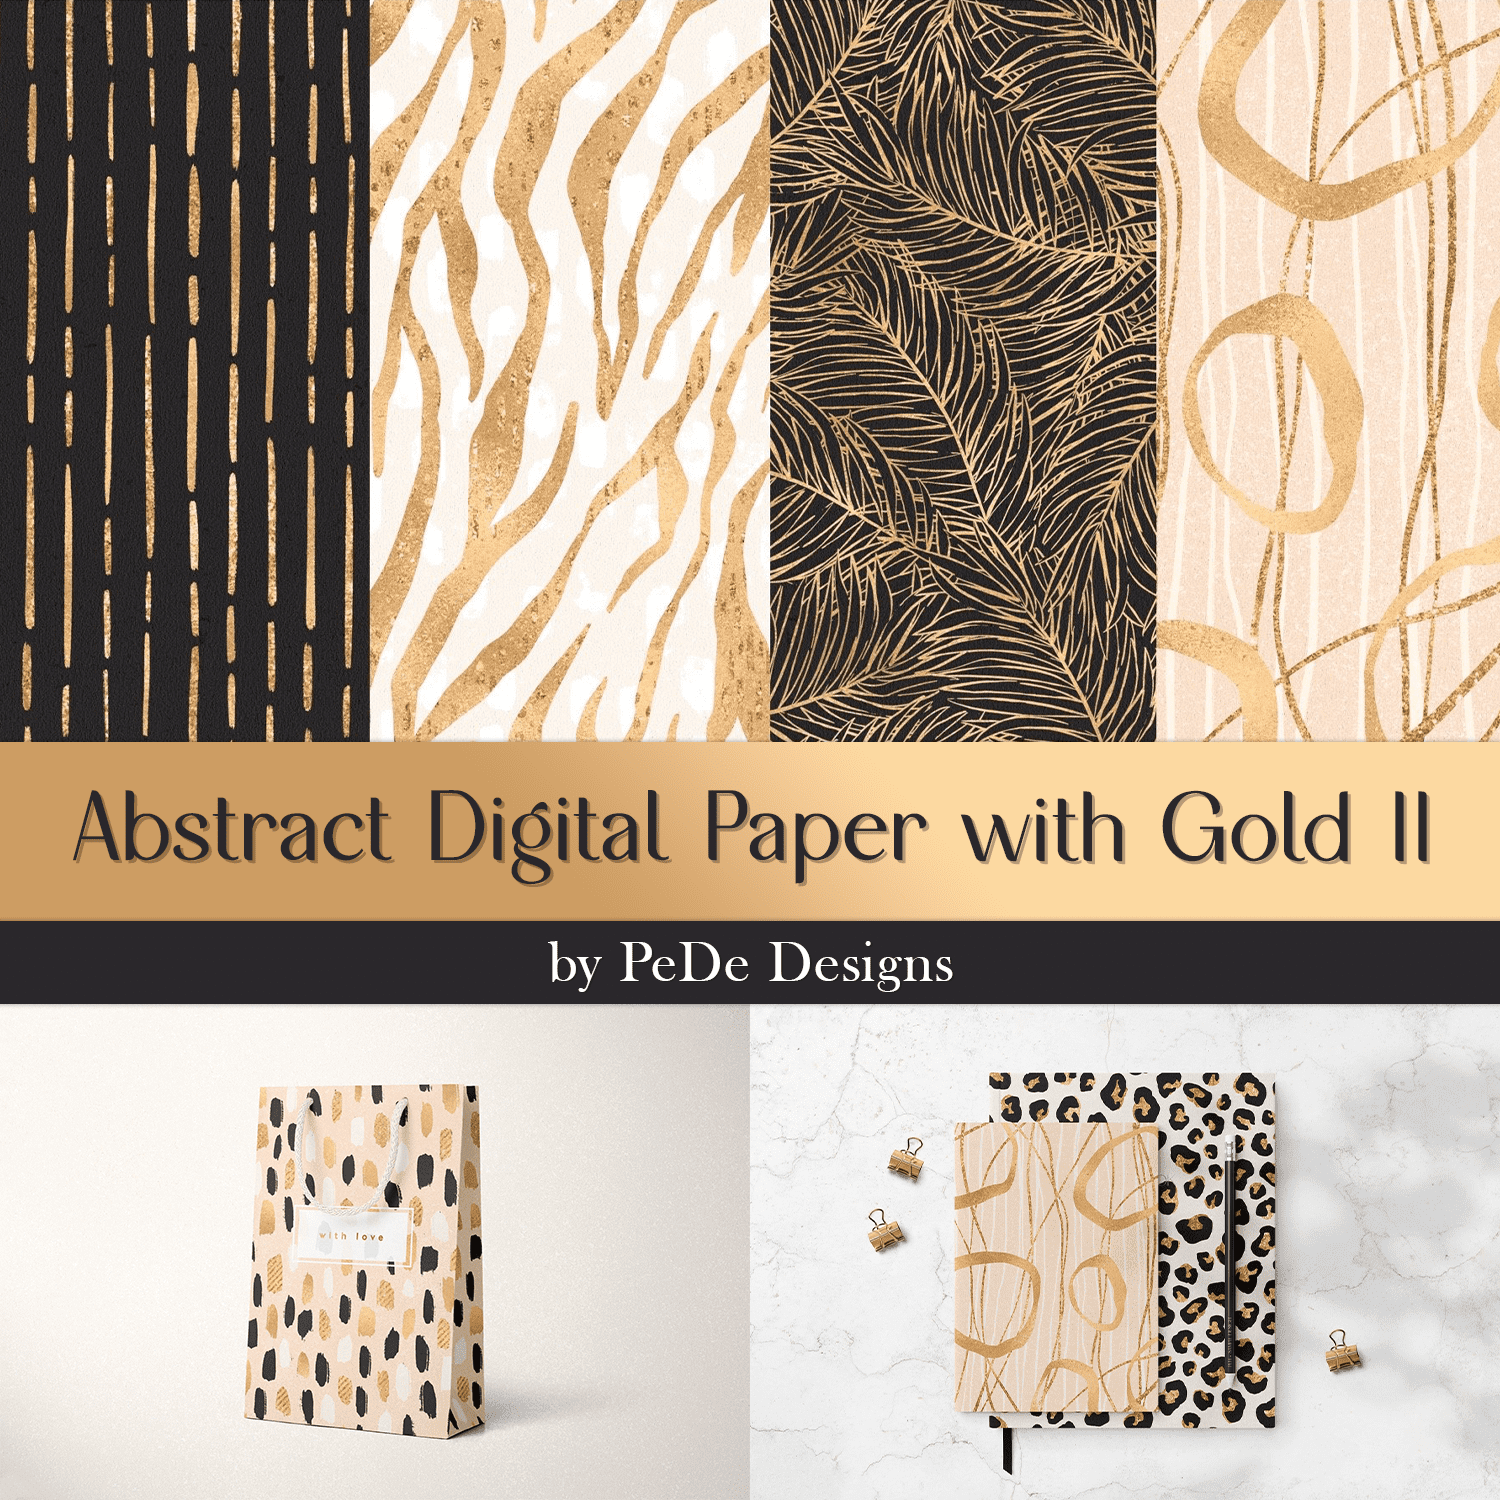 Abstract Digital Paper with Gold II cover.